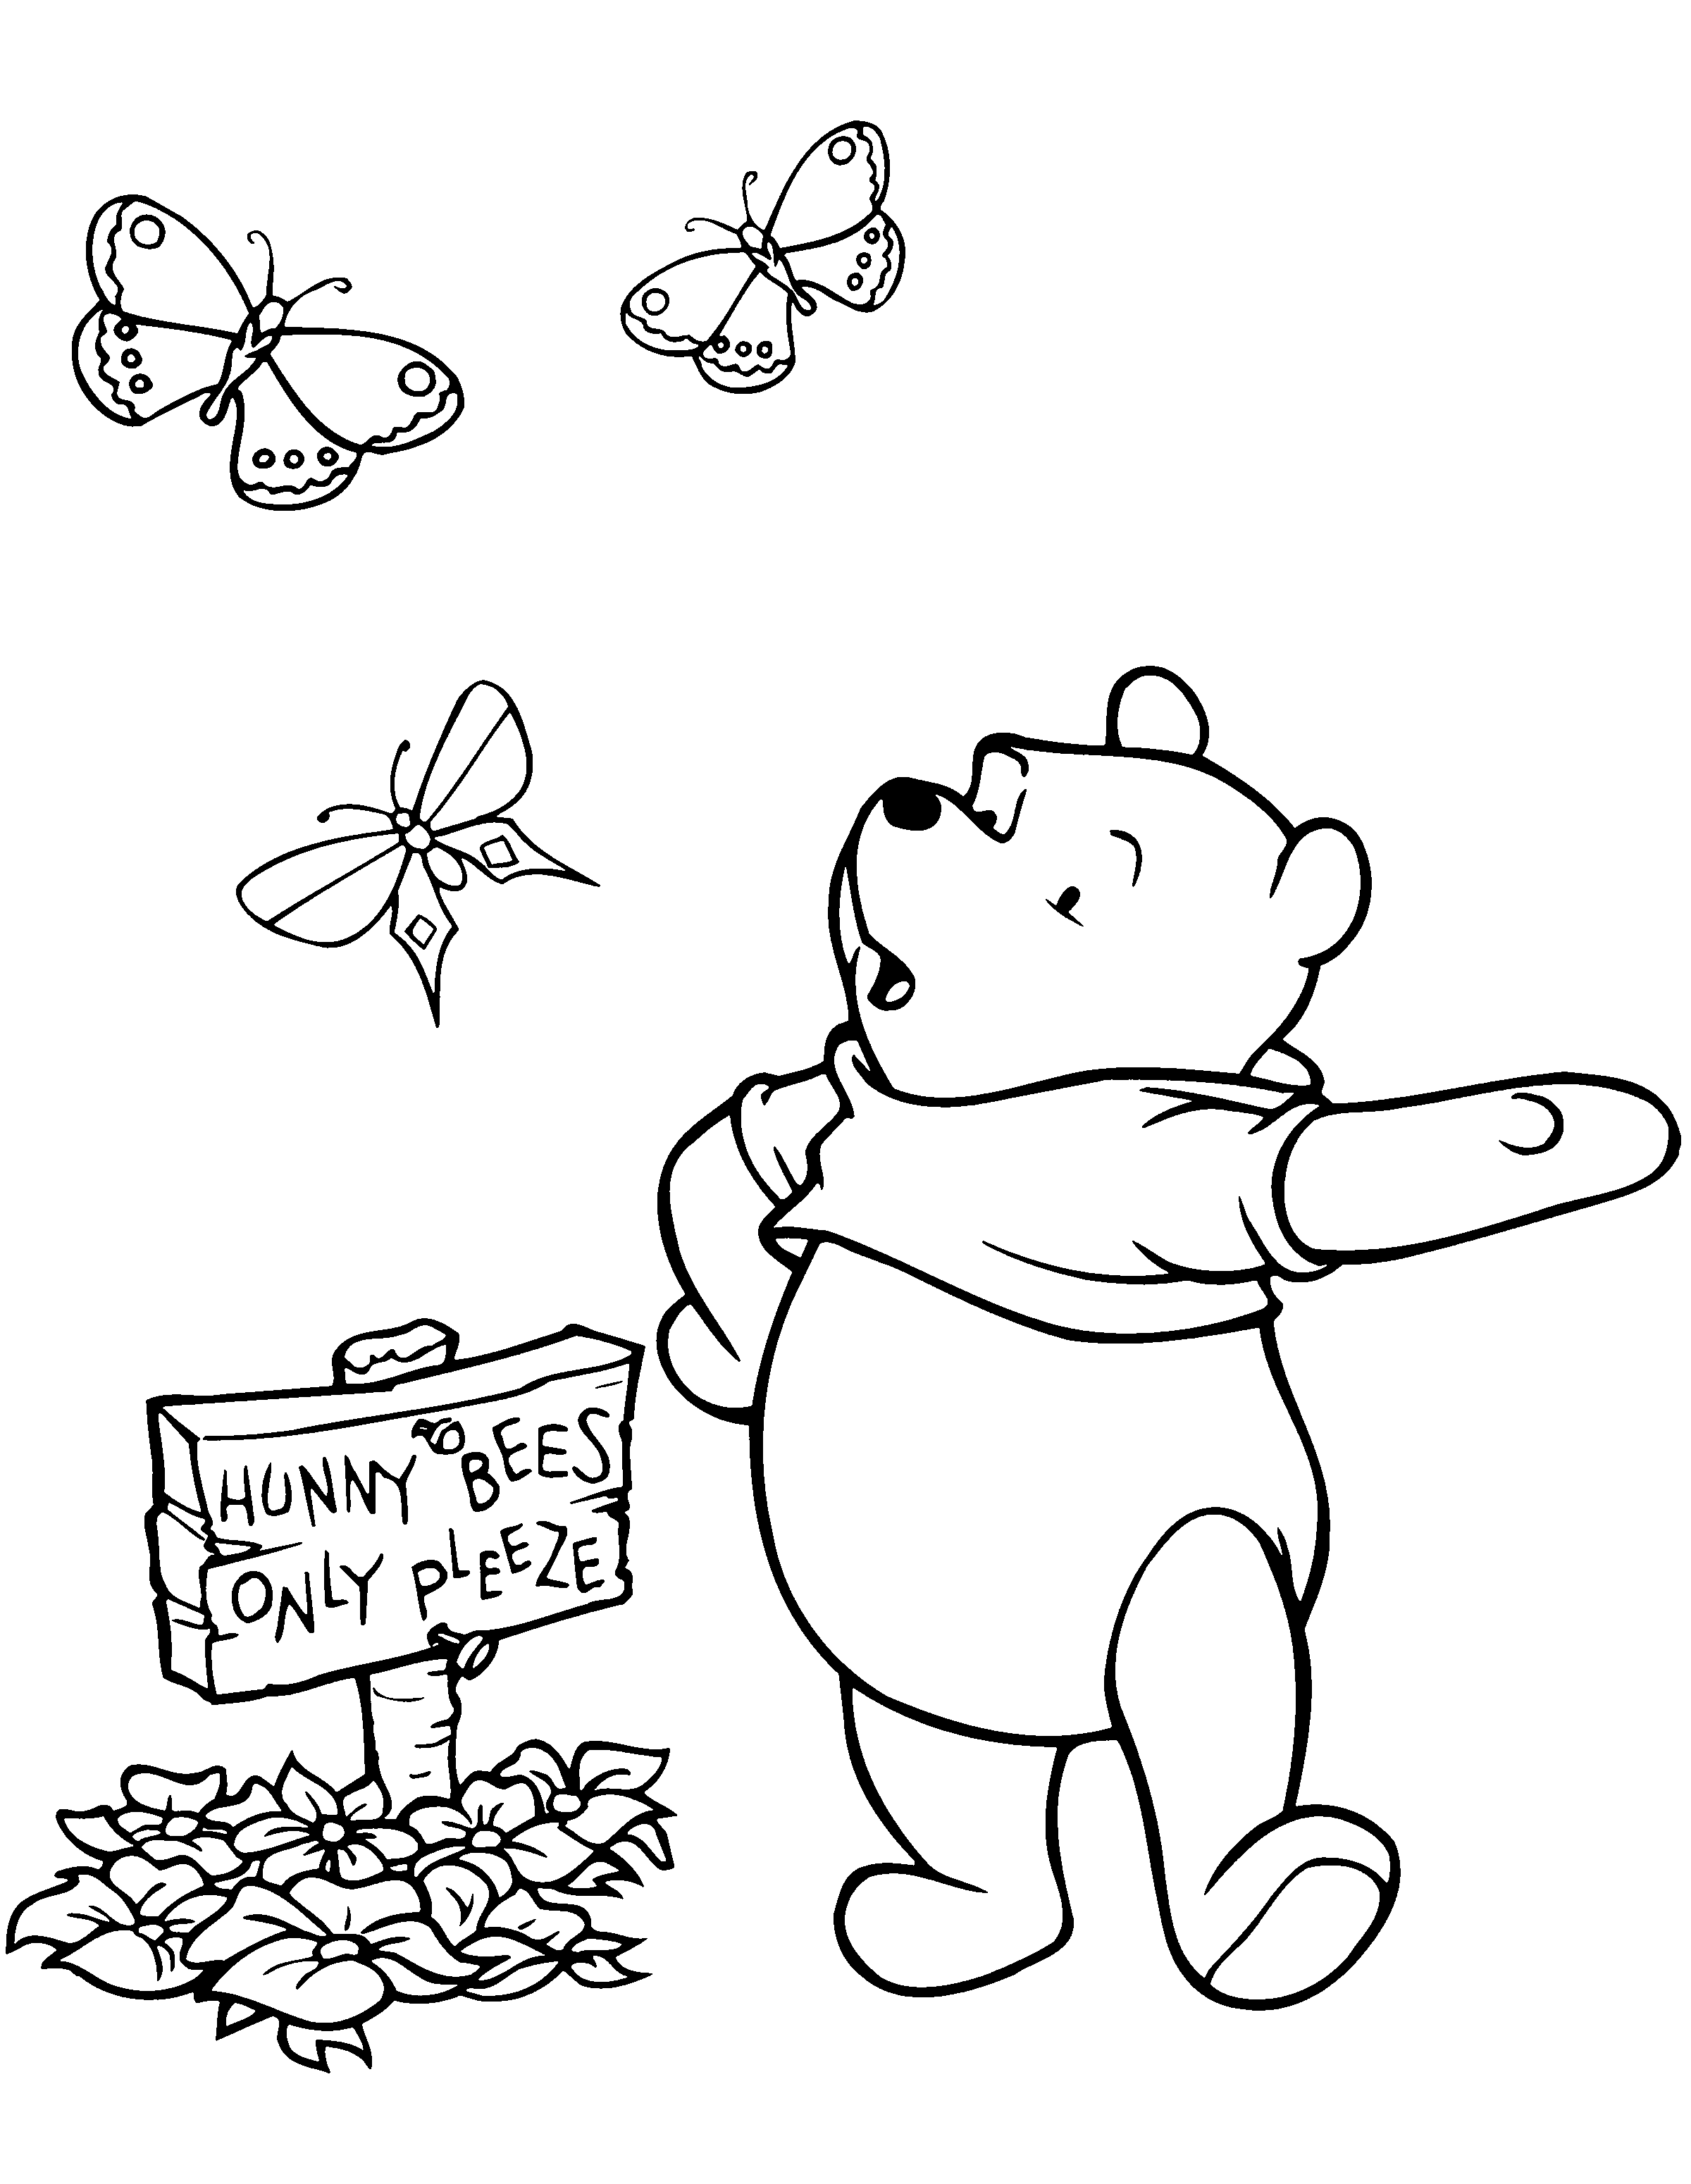 Winnie The Pooh Coloring Page Tv Series Coloring Page ...